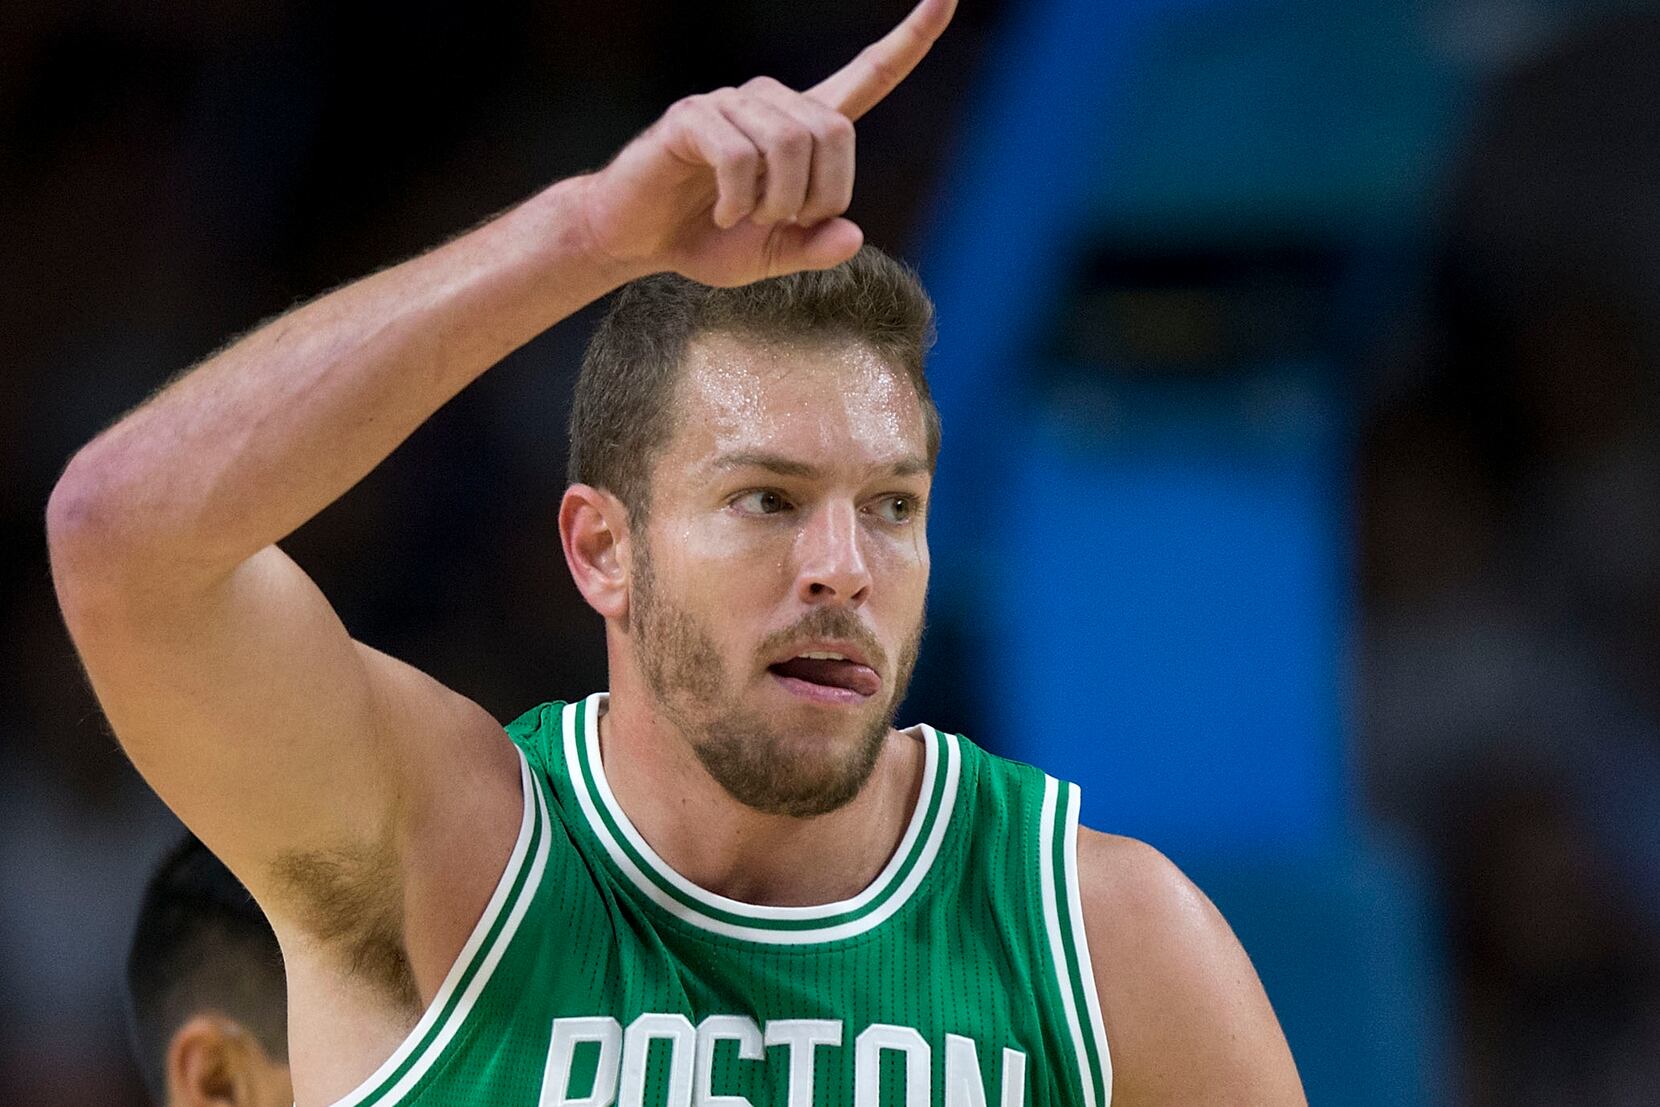 10 things you might not know about David Lee, the Mavericks' latest signee